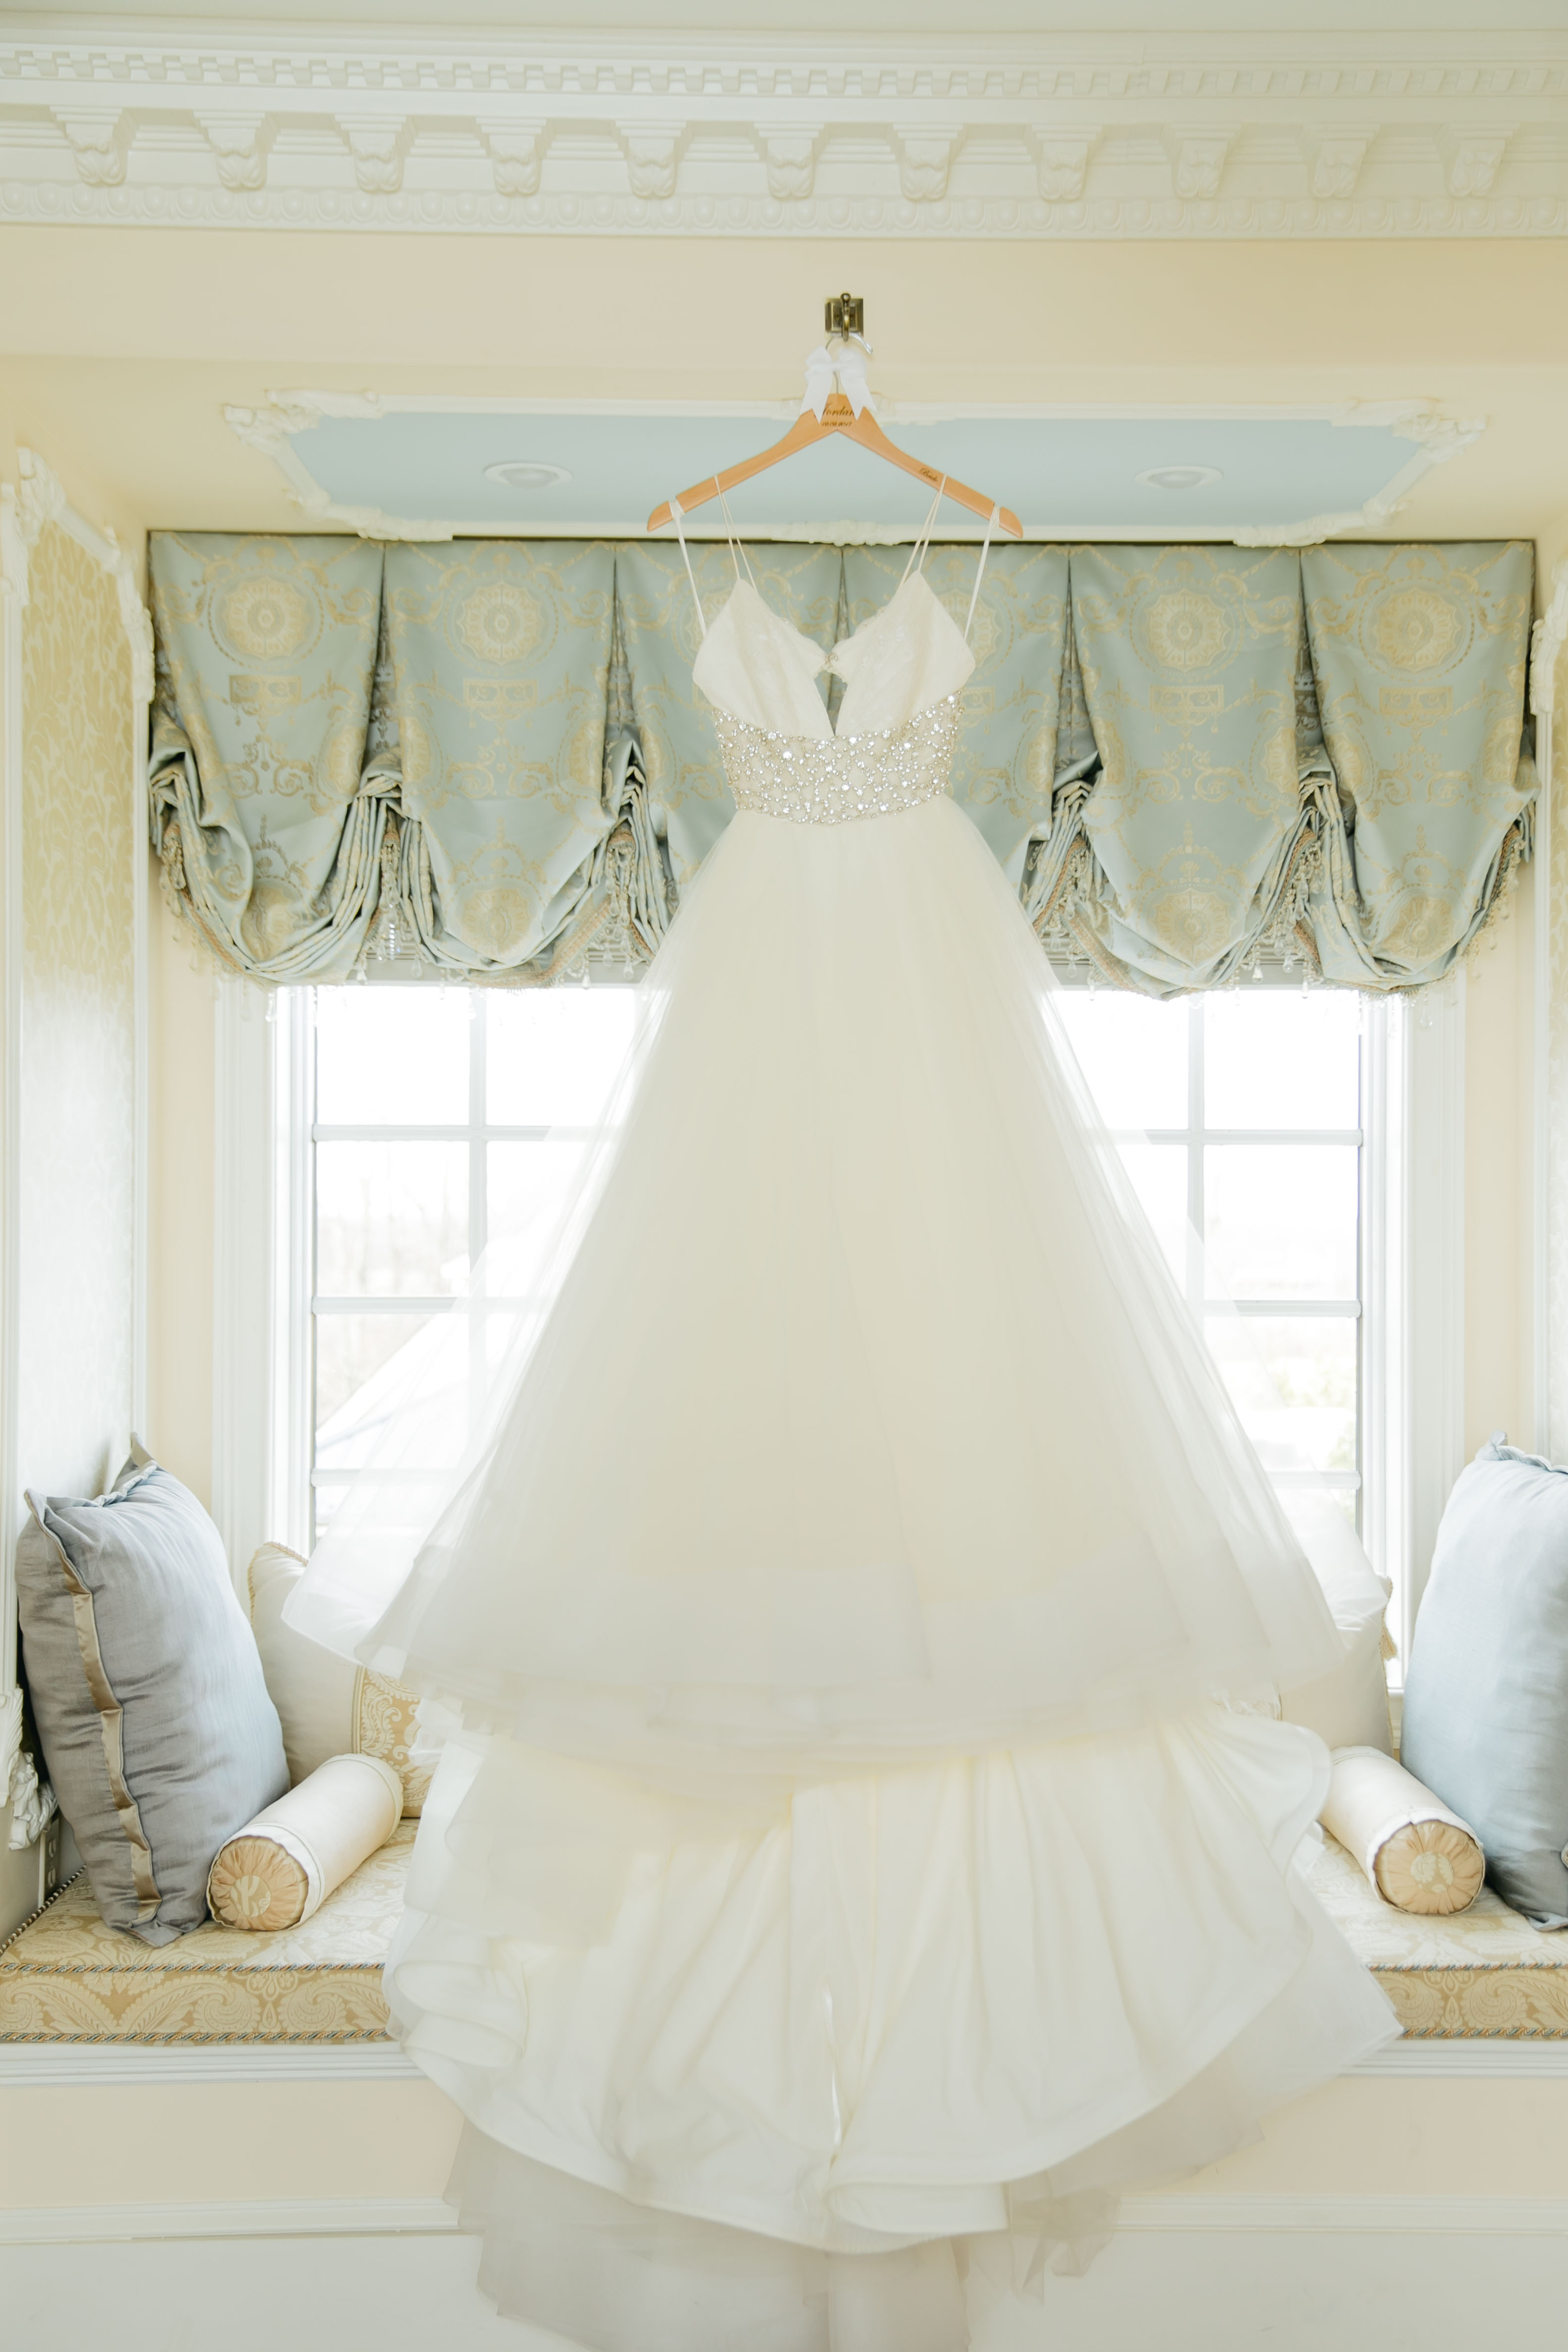 A gorgeous flowy ballgown was the perfect choice for our rustic chic winter wedding bride!